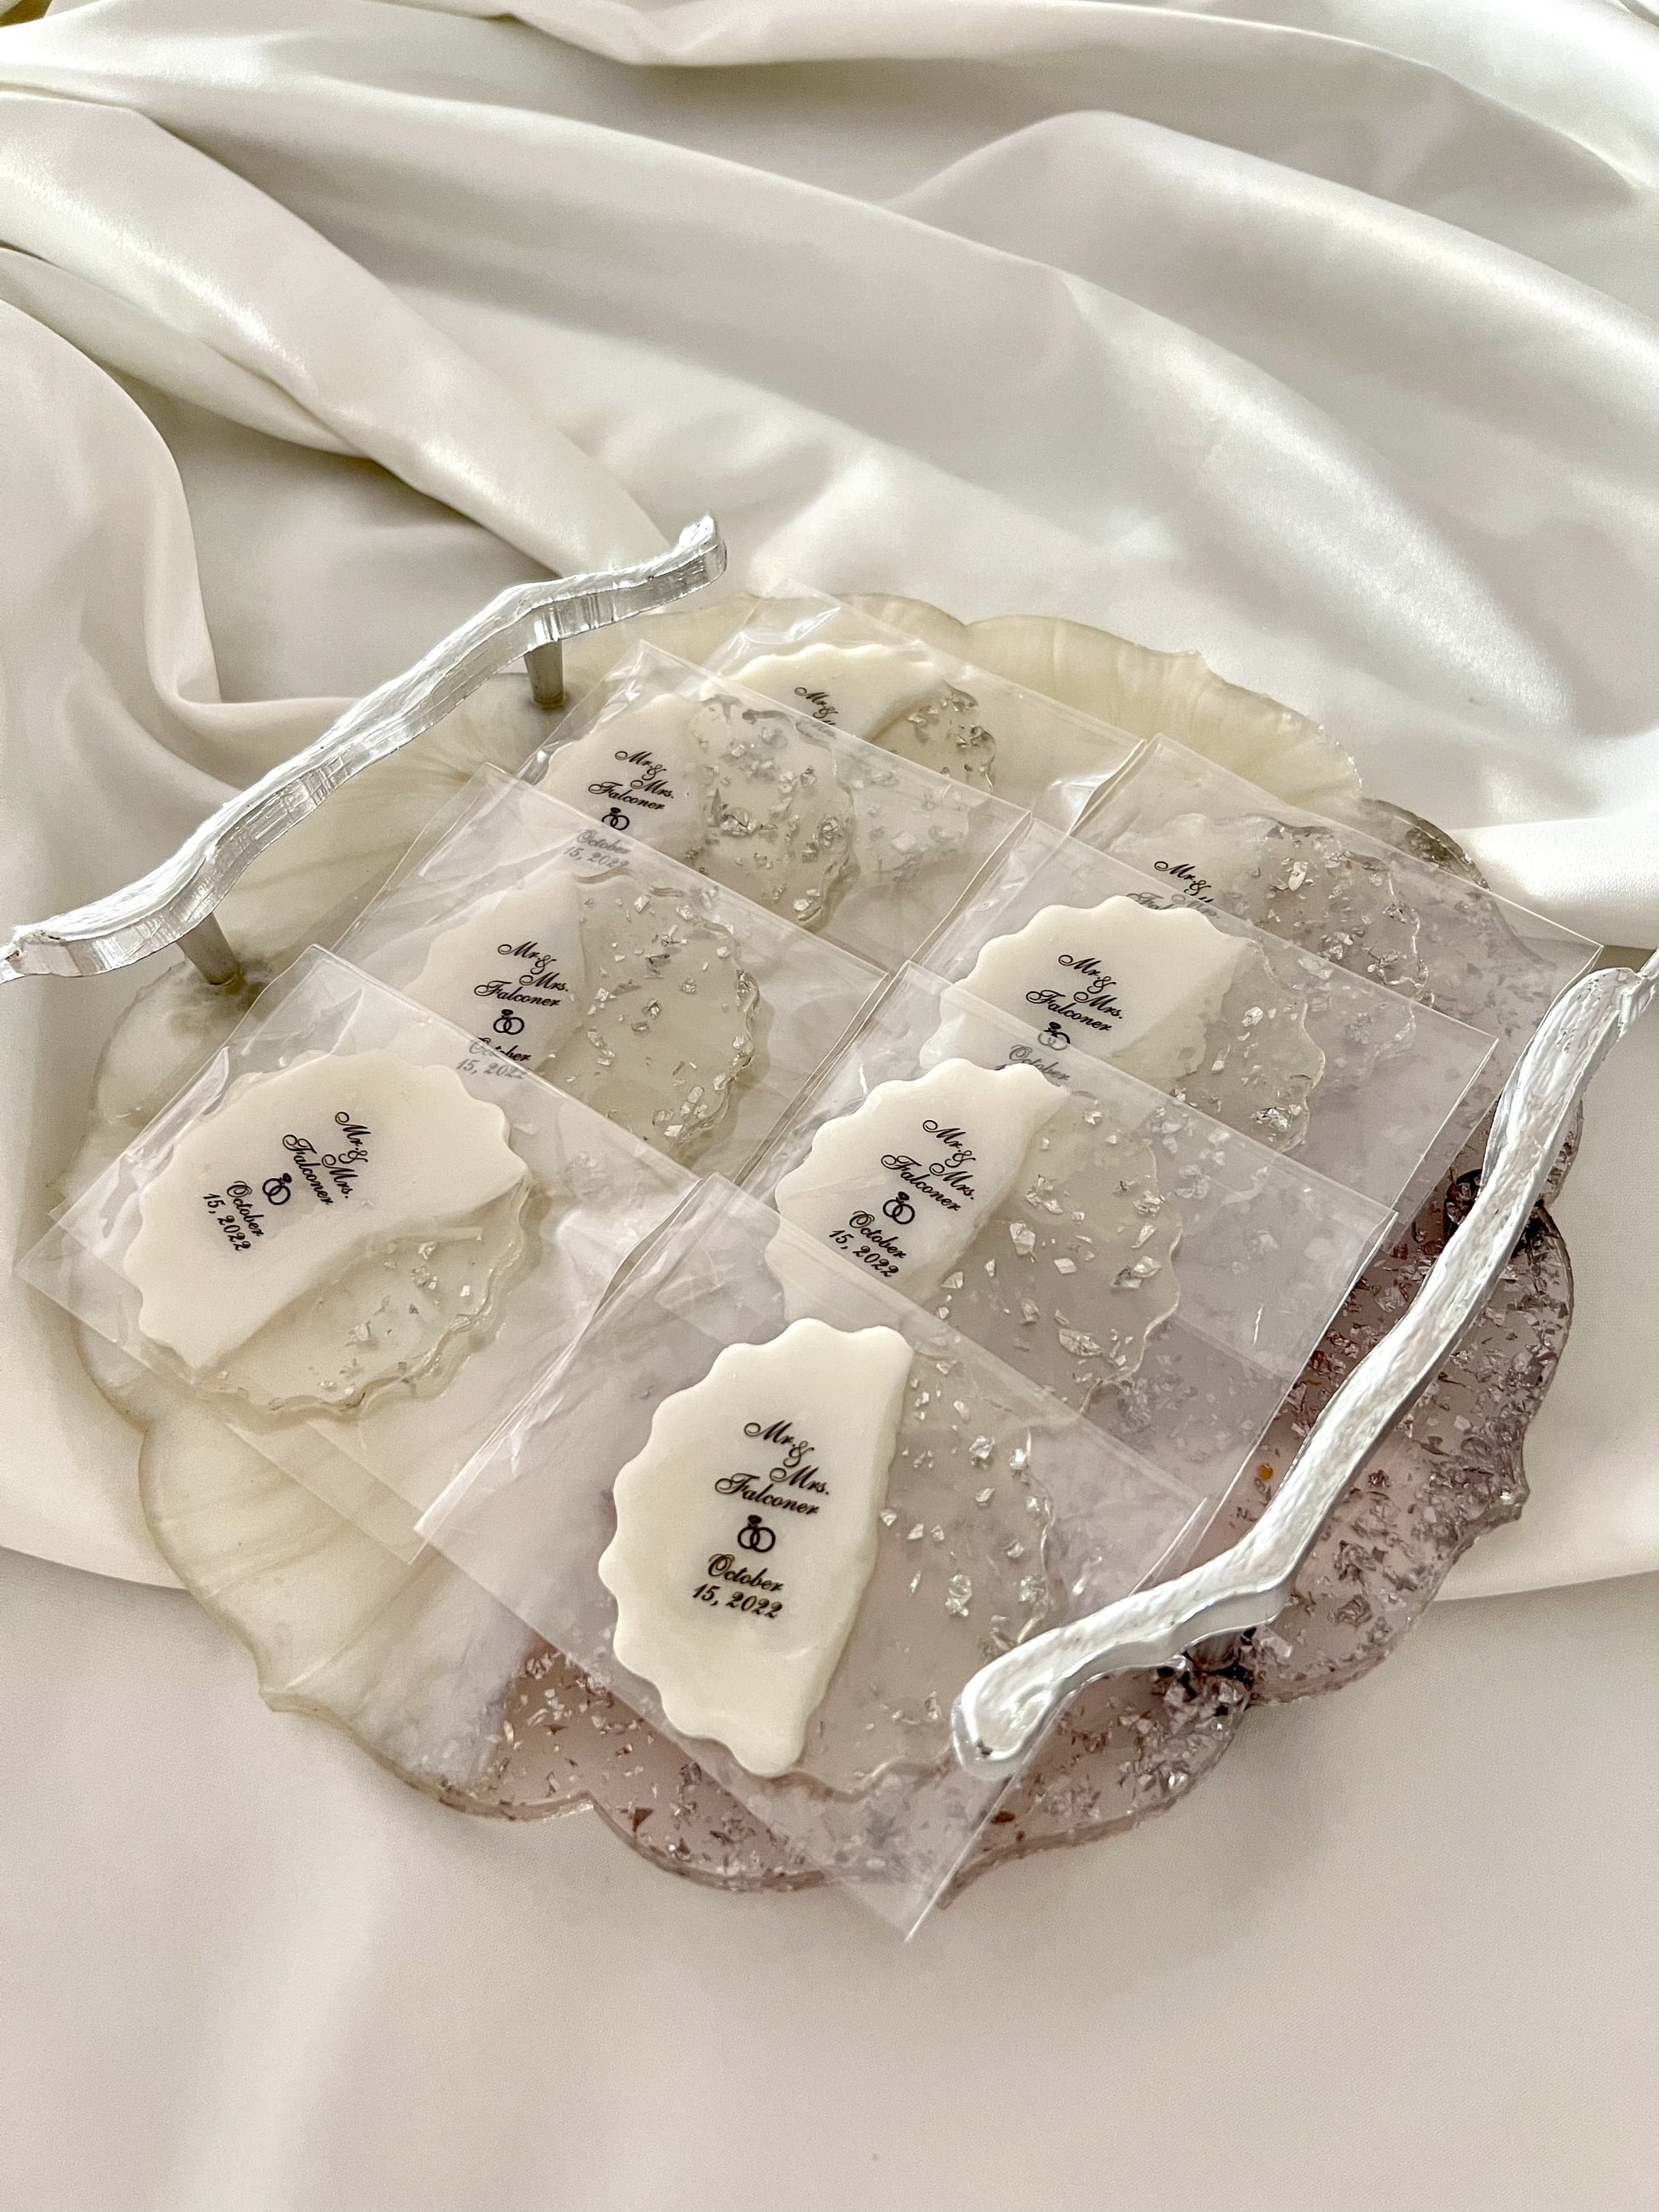 Wedding favors with unique tray | Bridal shower favors | Bridal shower gifts | Party favors in bulk | Wedding favors for guests